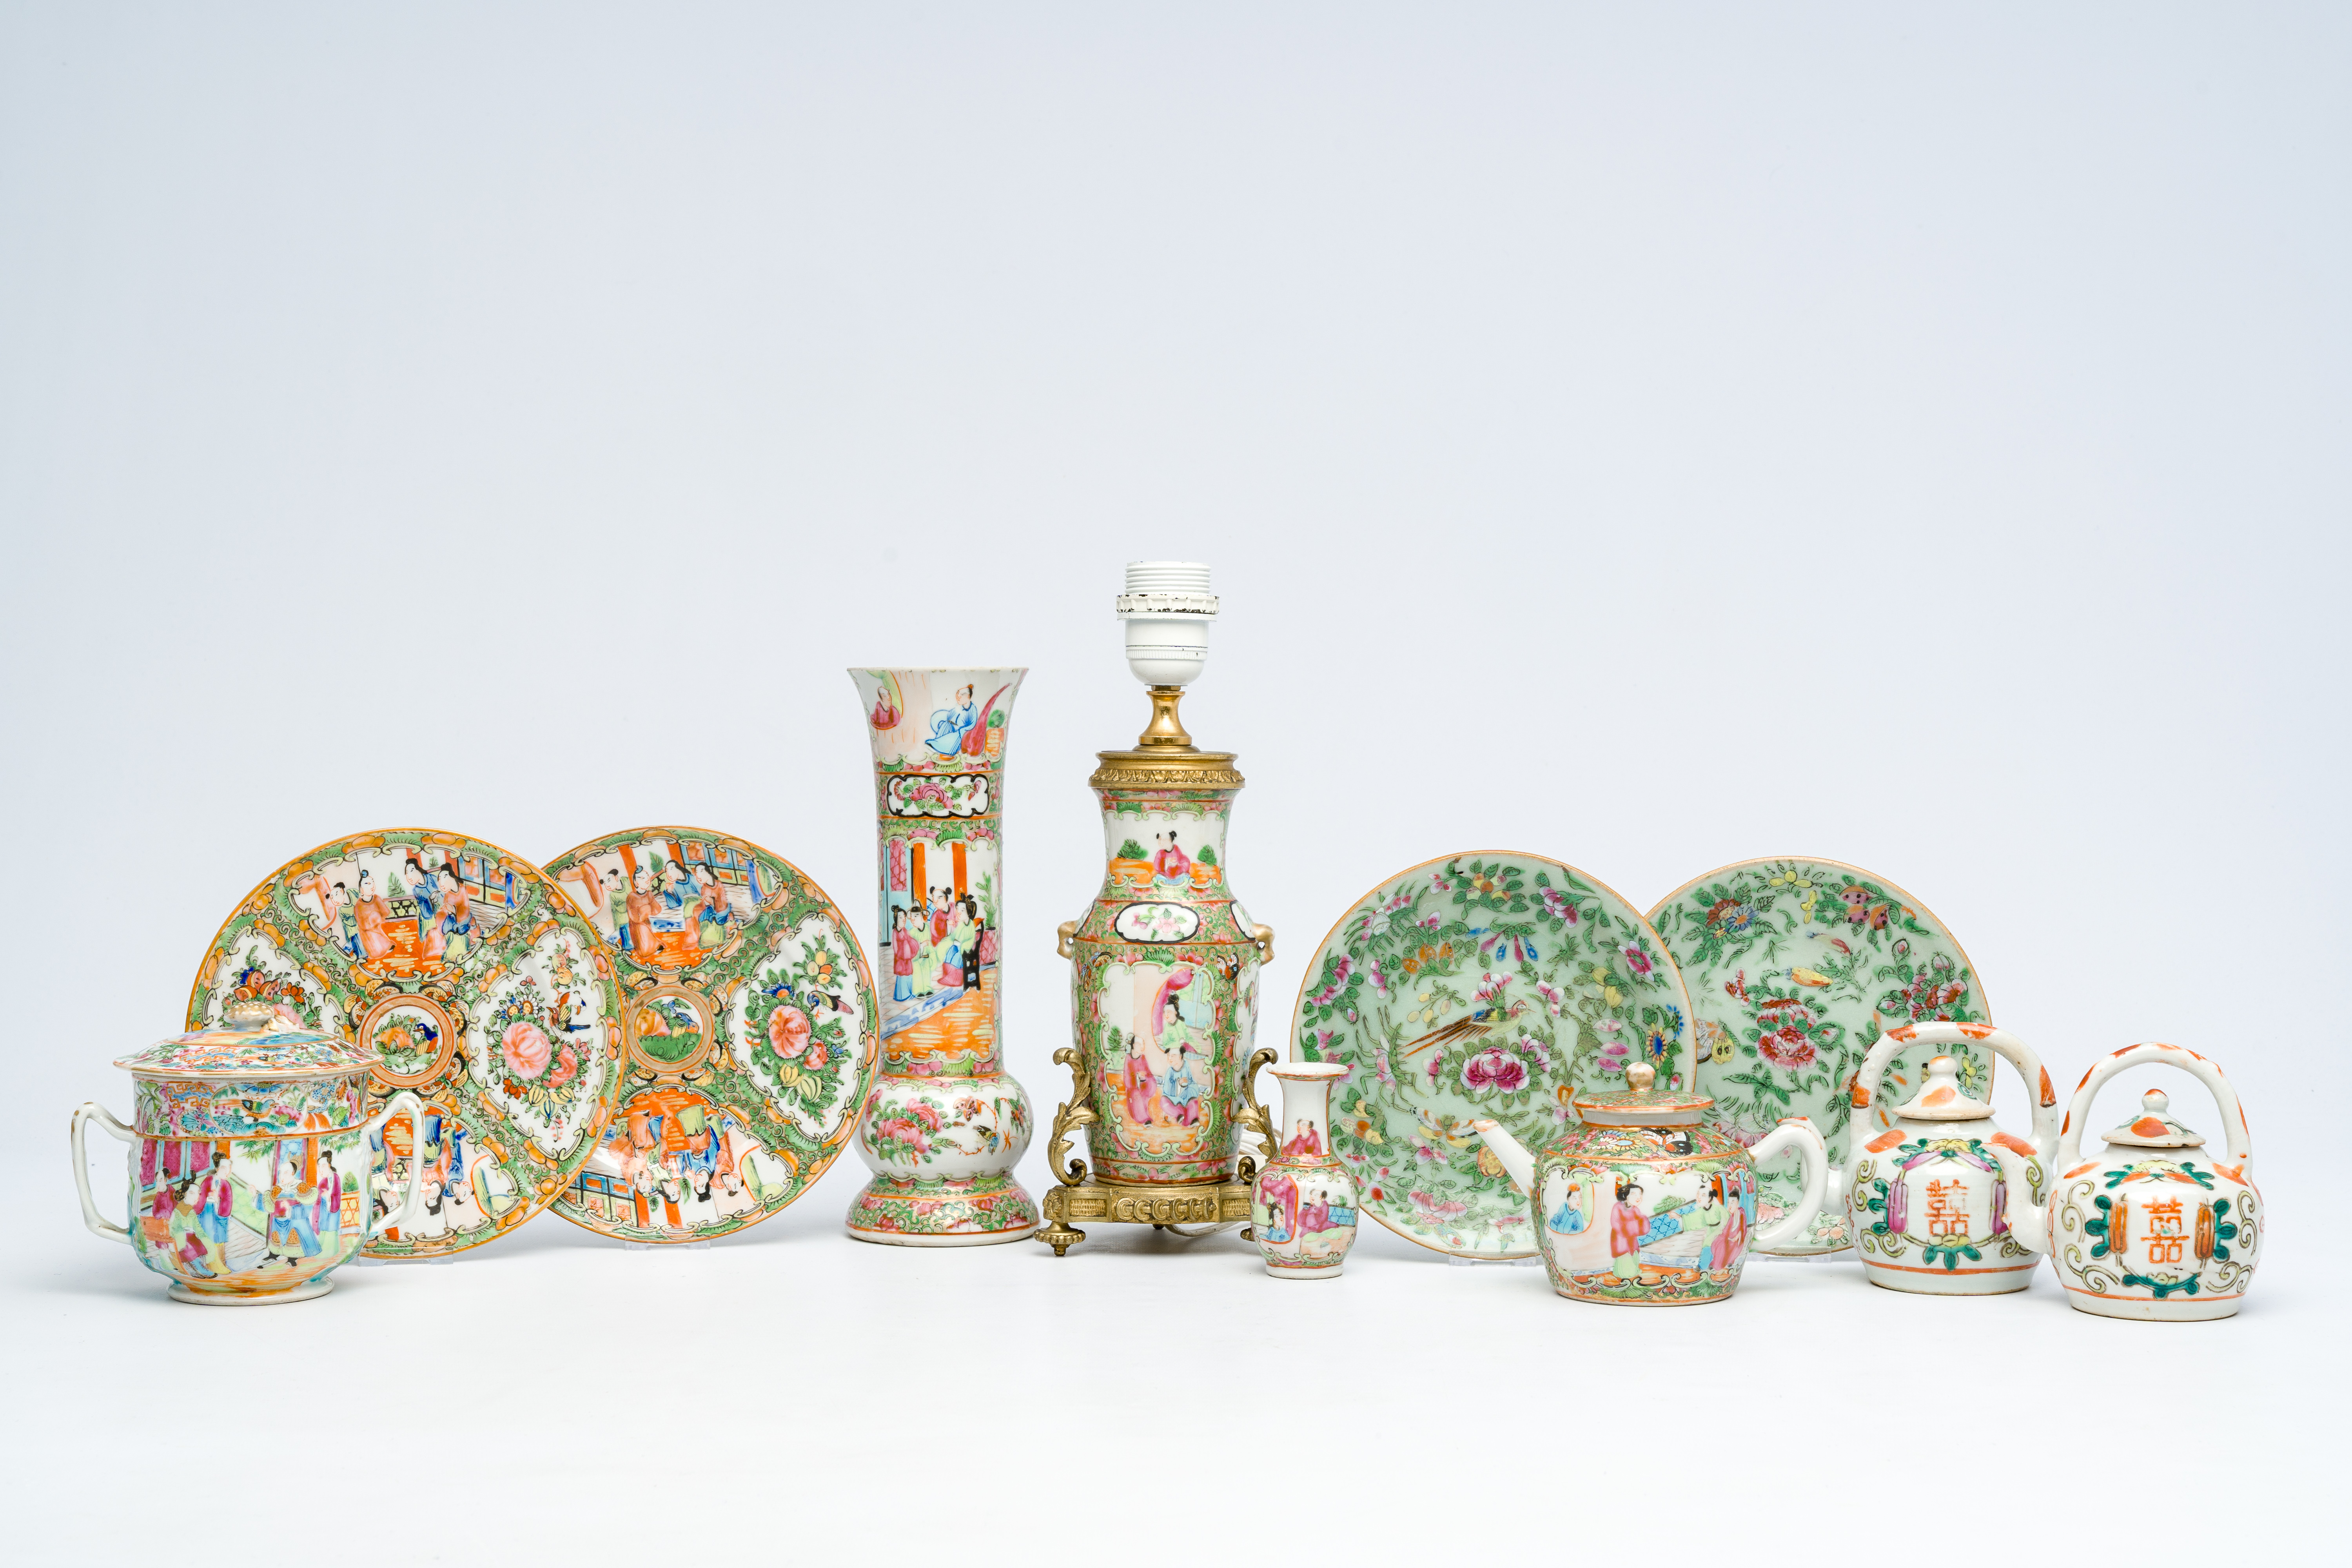 A varied collection of Chinese famille rose and Canton famille rose porcelain with floral design and